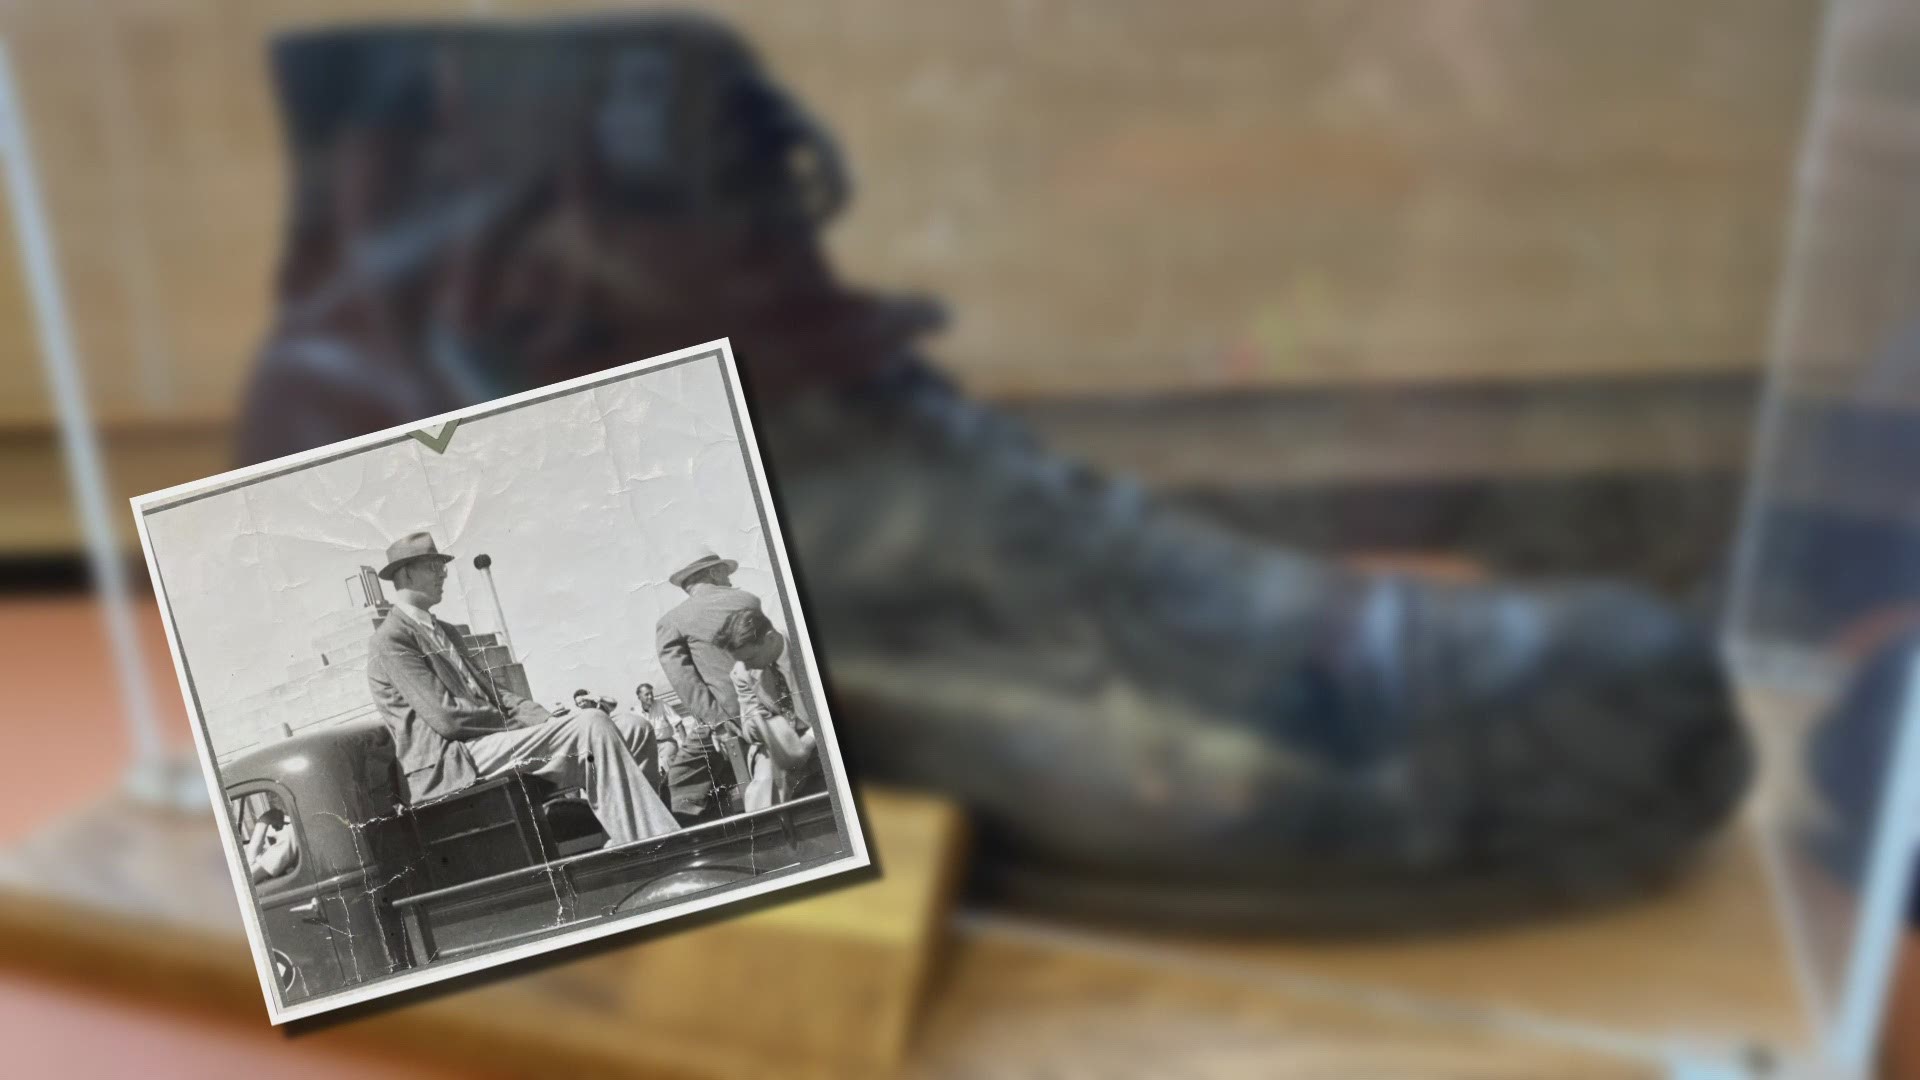 Robert Wadlow stood one inch shy of 9-feet tall at the time of his death in Manistee, Mi. on July 15, 1940. Snyder's Shoes has a 'Wadlow shrine' on display, daily.